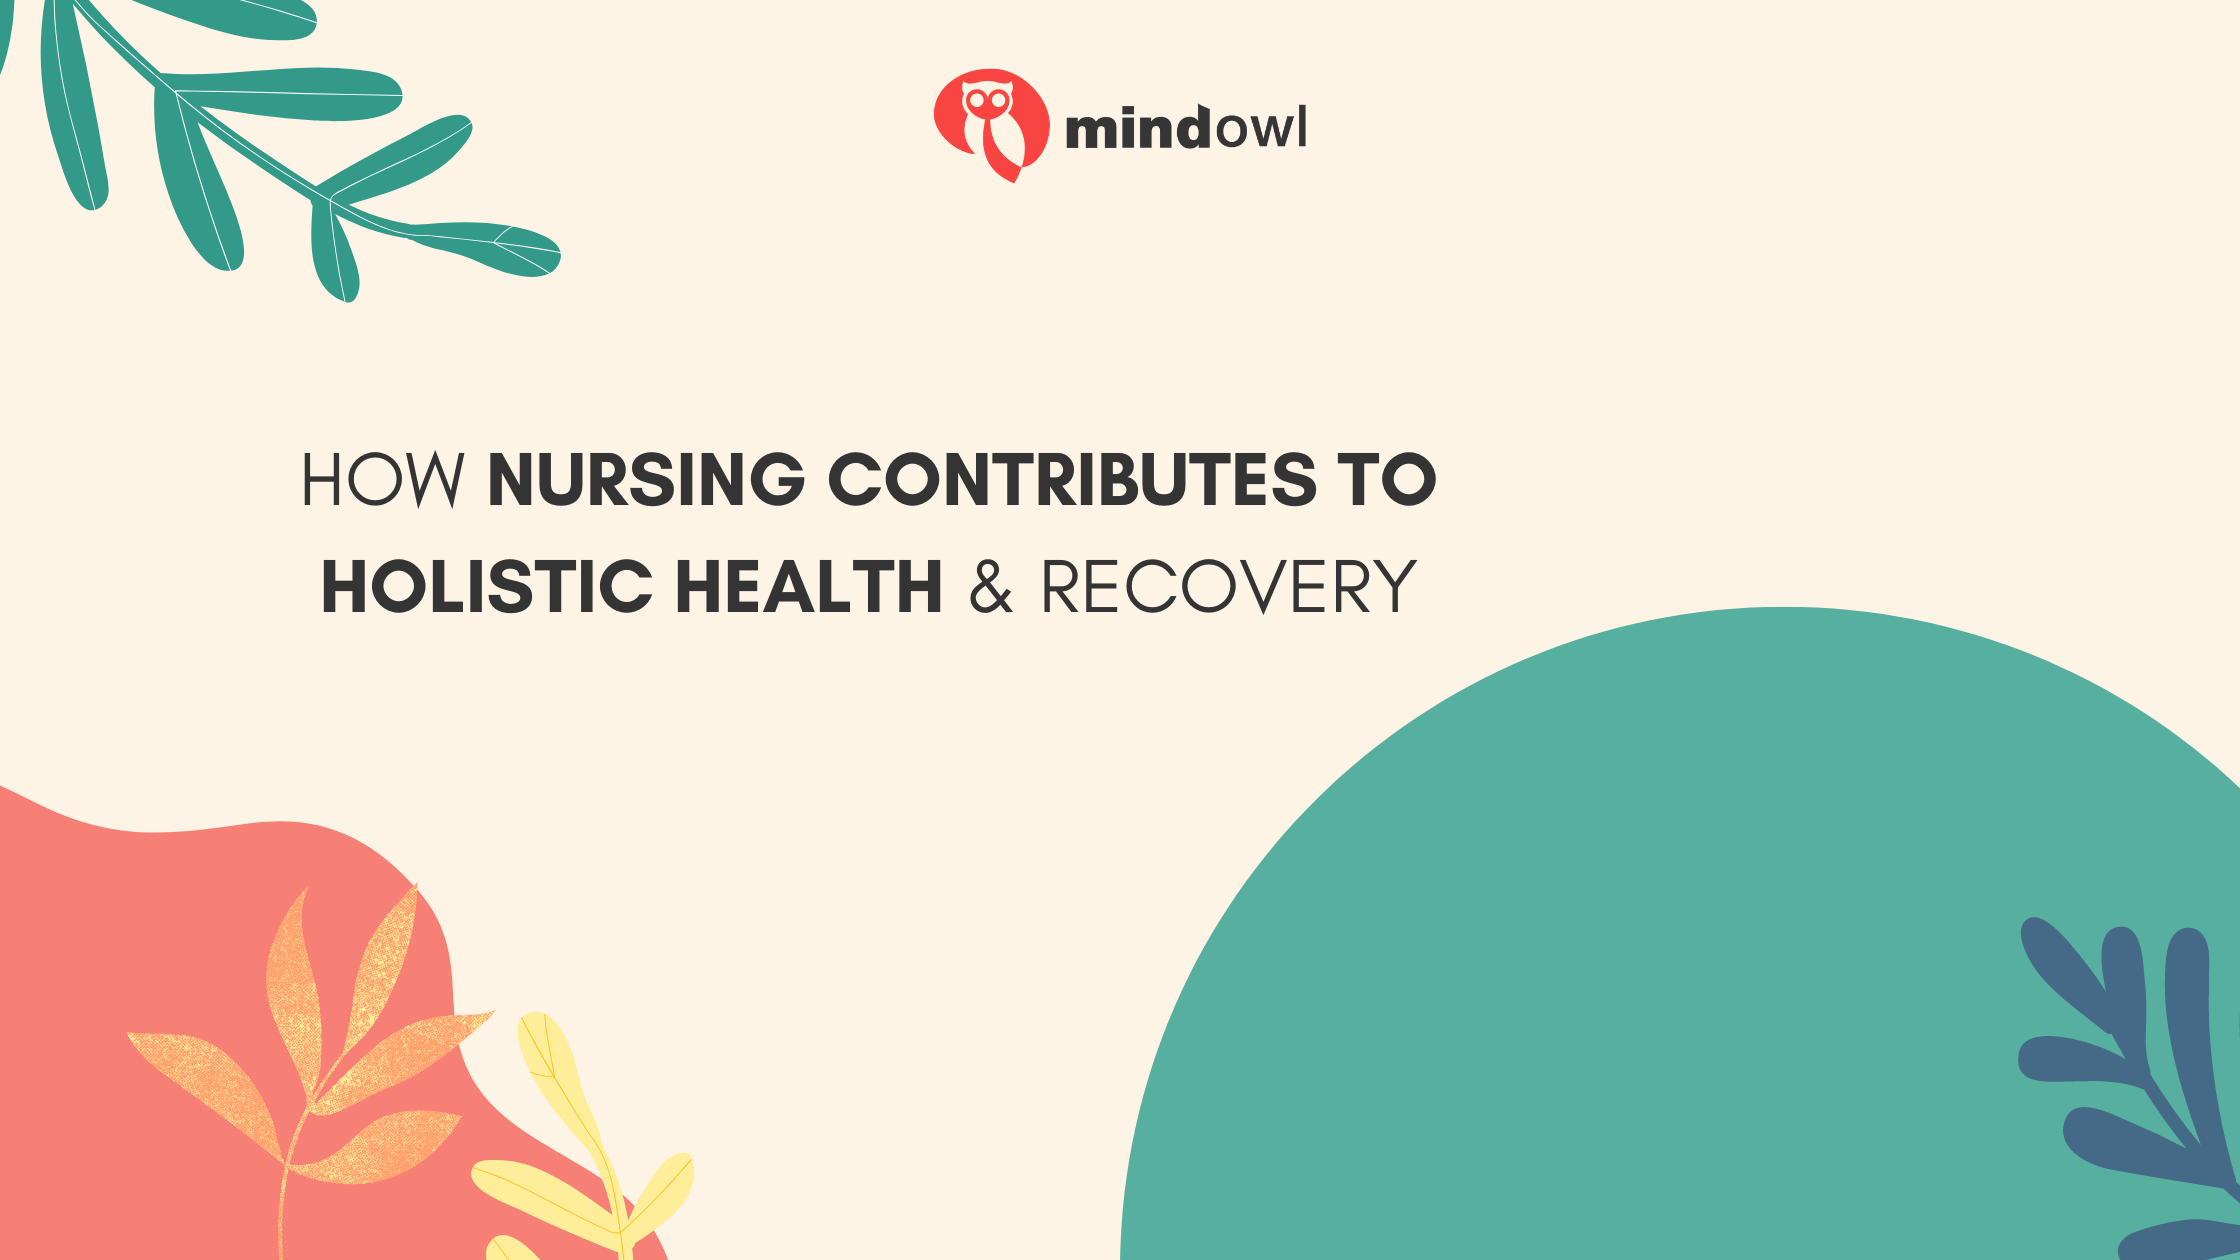 How Nursing Contributes to Holistic Health & Recovery